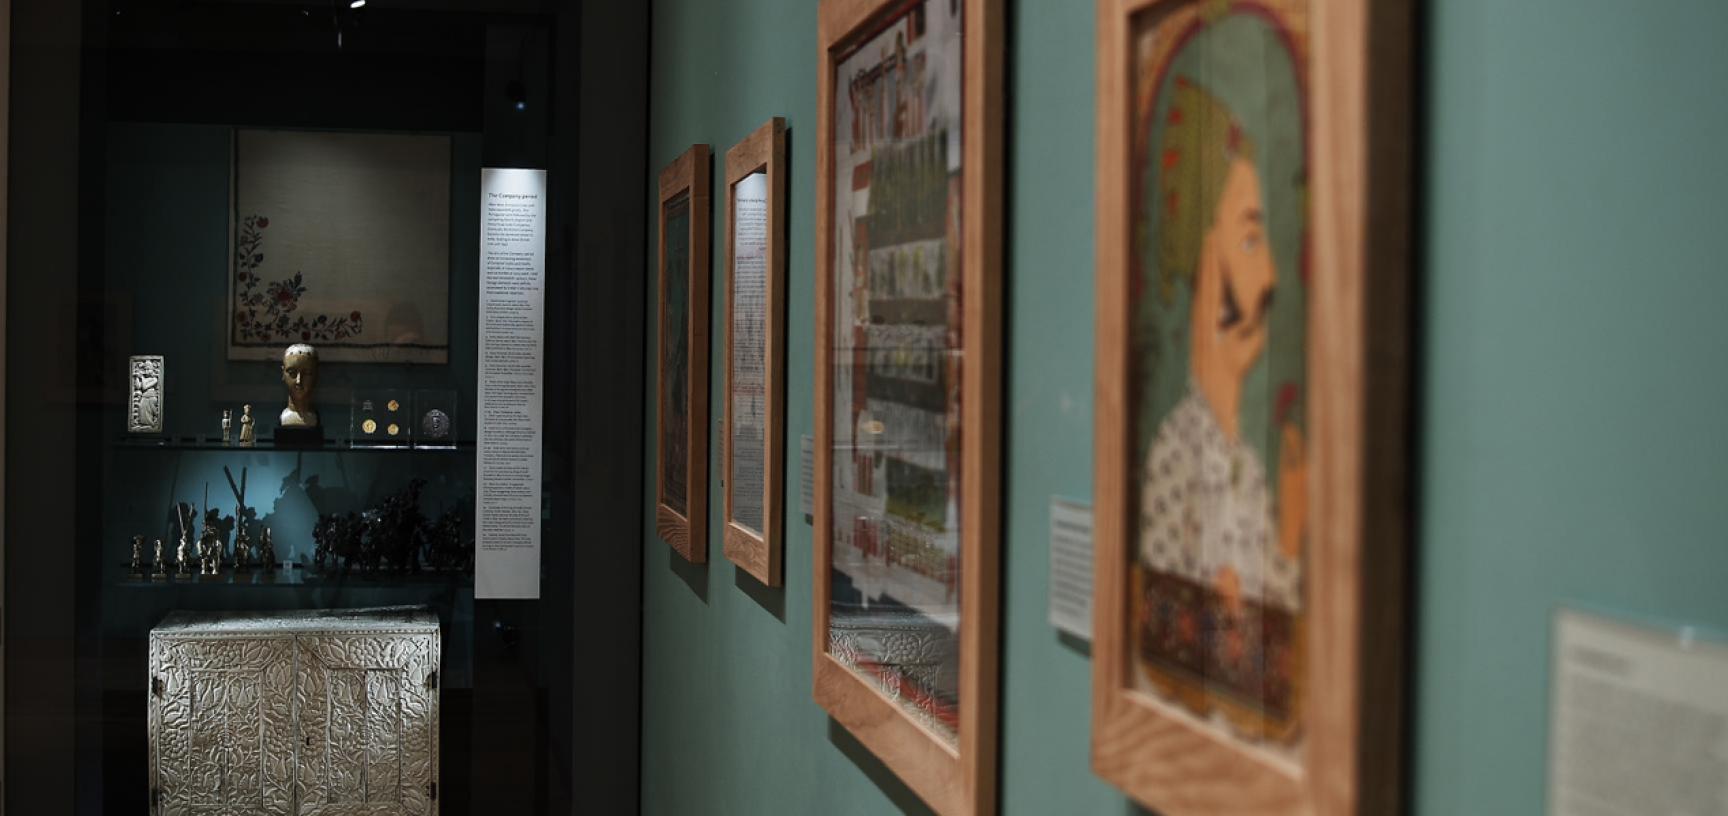 The Mughal India Gallery at the Ashmolean Museum